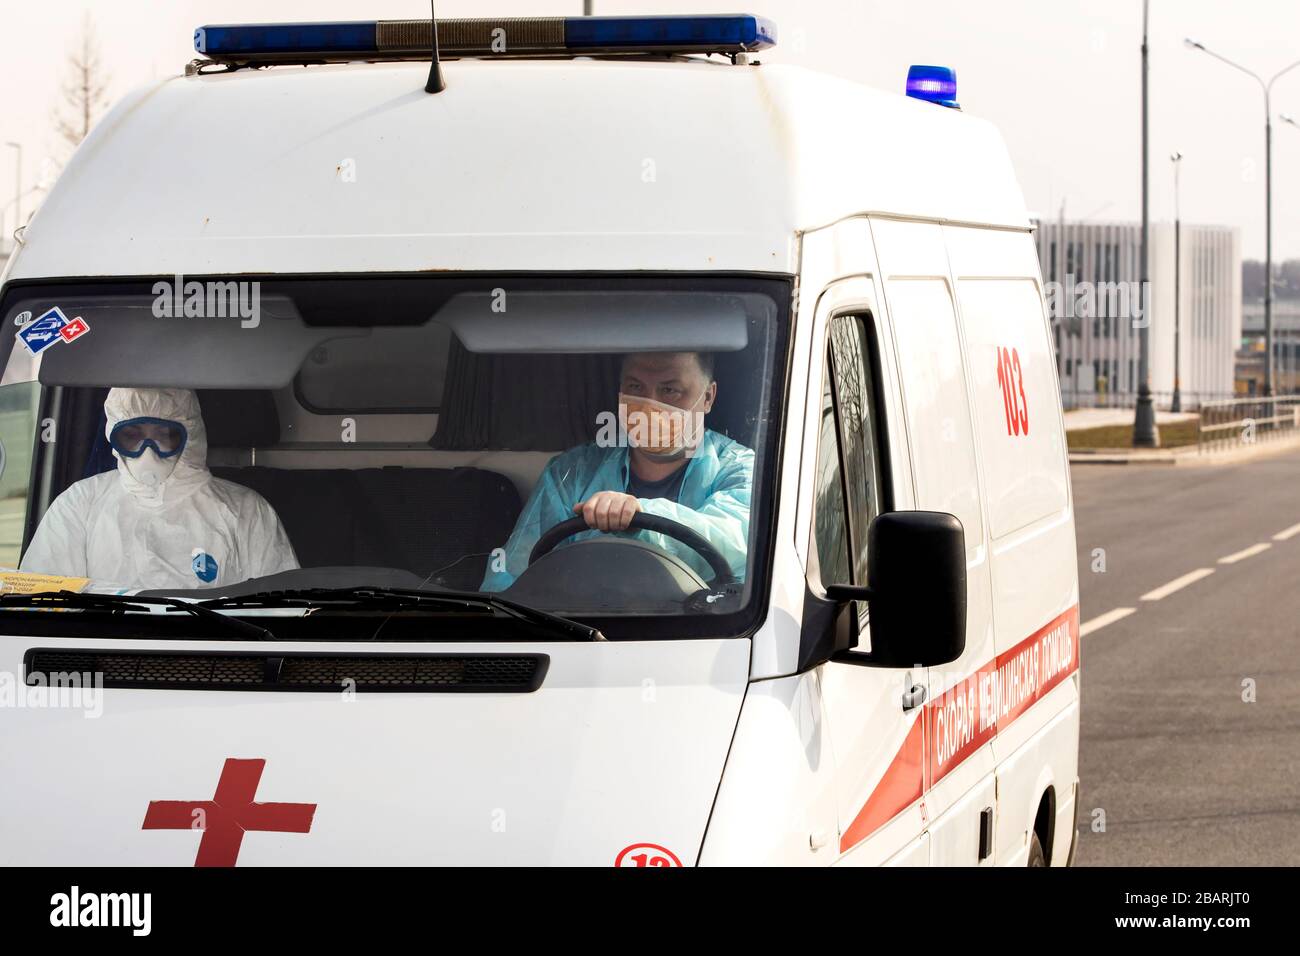 Moscow, Russia. 29th Mar, 2020. A paramedic and driver, wearing protective suits, drive an ambulance car is seen at the Novomoskovsky multi-speciality medical centre in Kommunarka, Novomoskovsky Administrative District, during the coronavirus pandemic of the COVID-19 Stock Photo